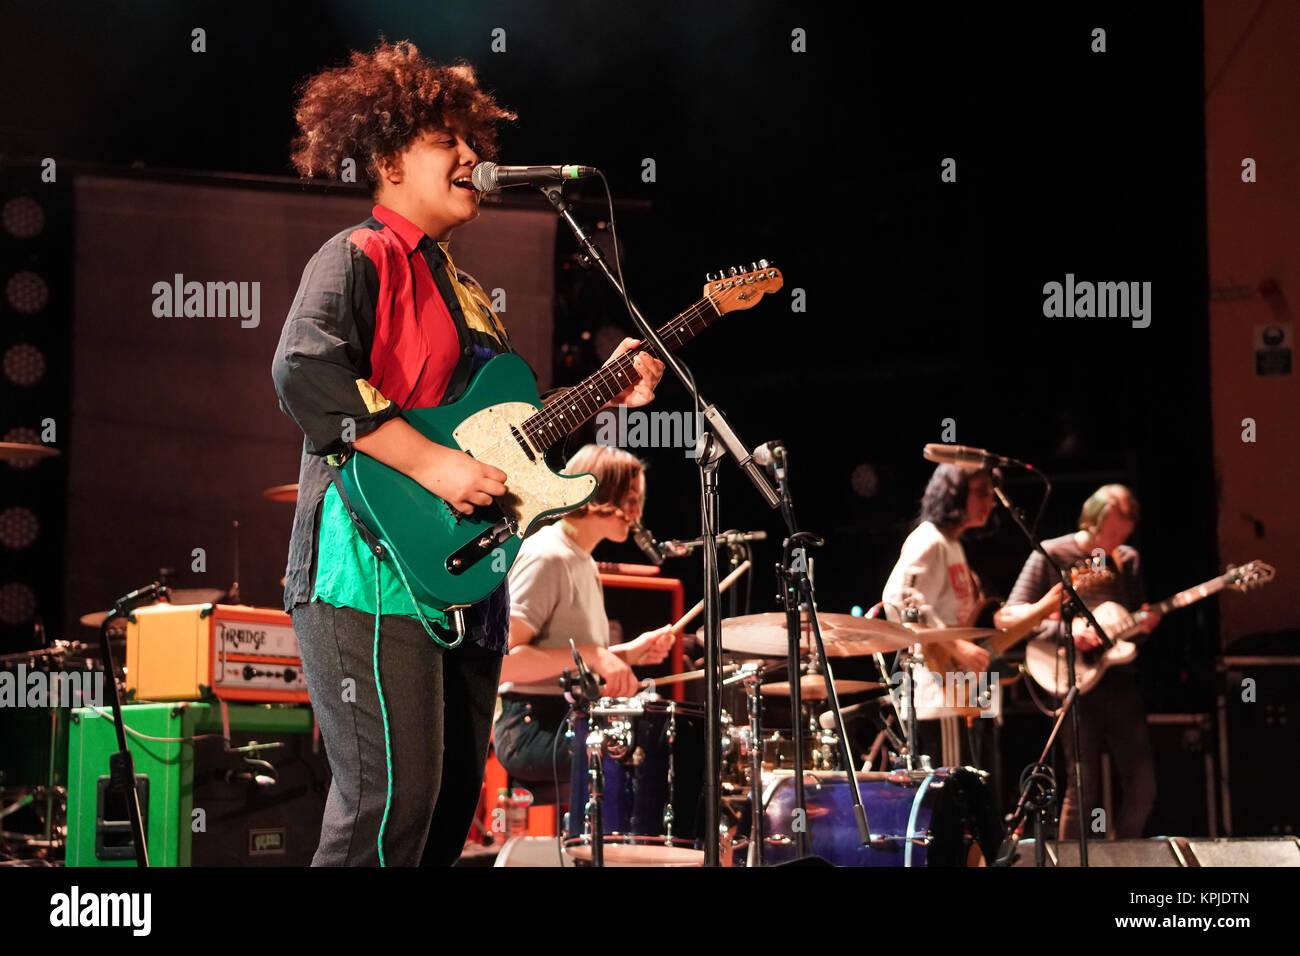 London, UK. 15th Dec, 2017. Sacred Paws performing live on stage (supporting Mogwai) at Brixton O2 Academy in London. Photo date: Friday, December 15, 2017. Credit: Roger Garfield/Alamy Live News Stock Photo